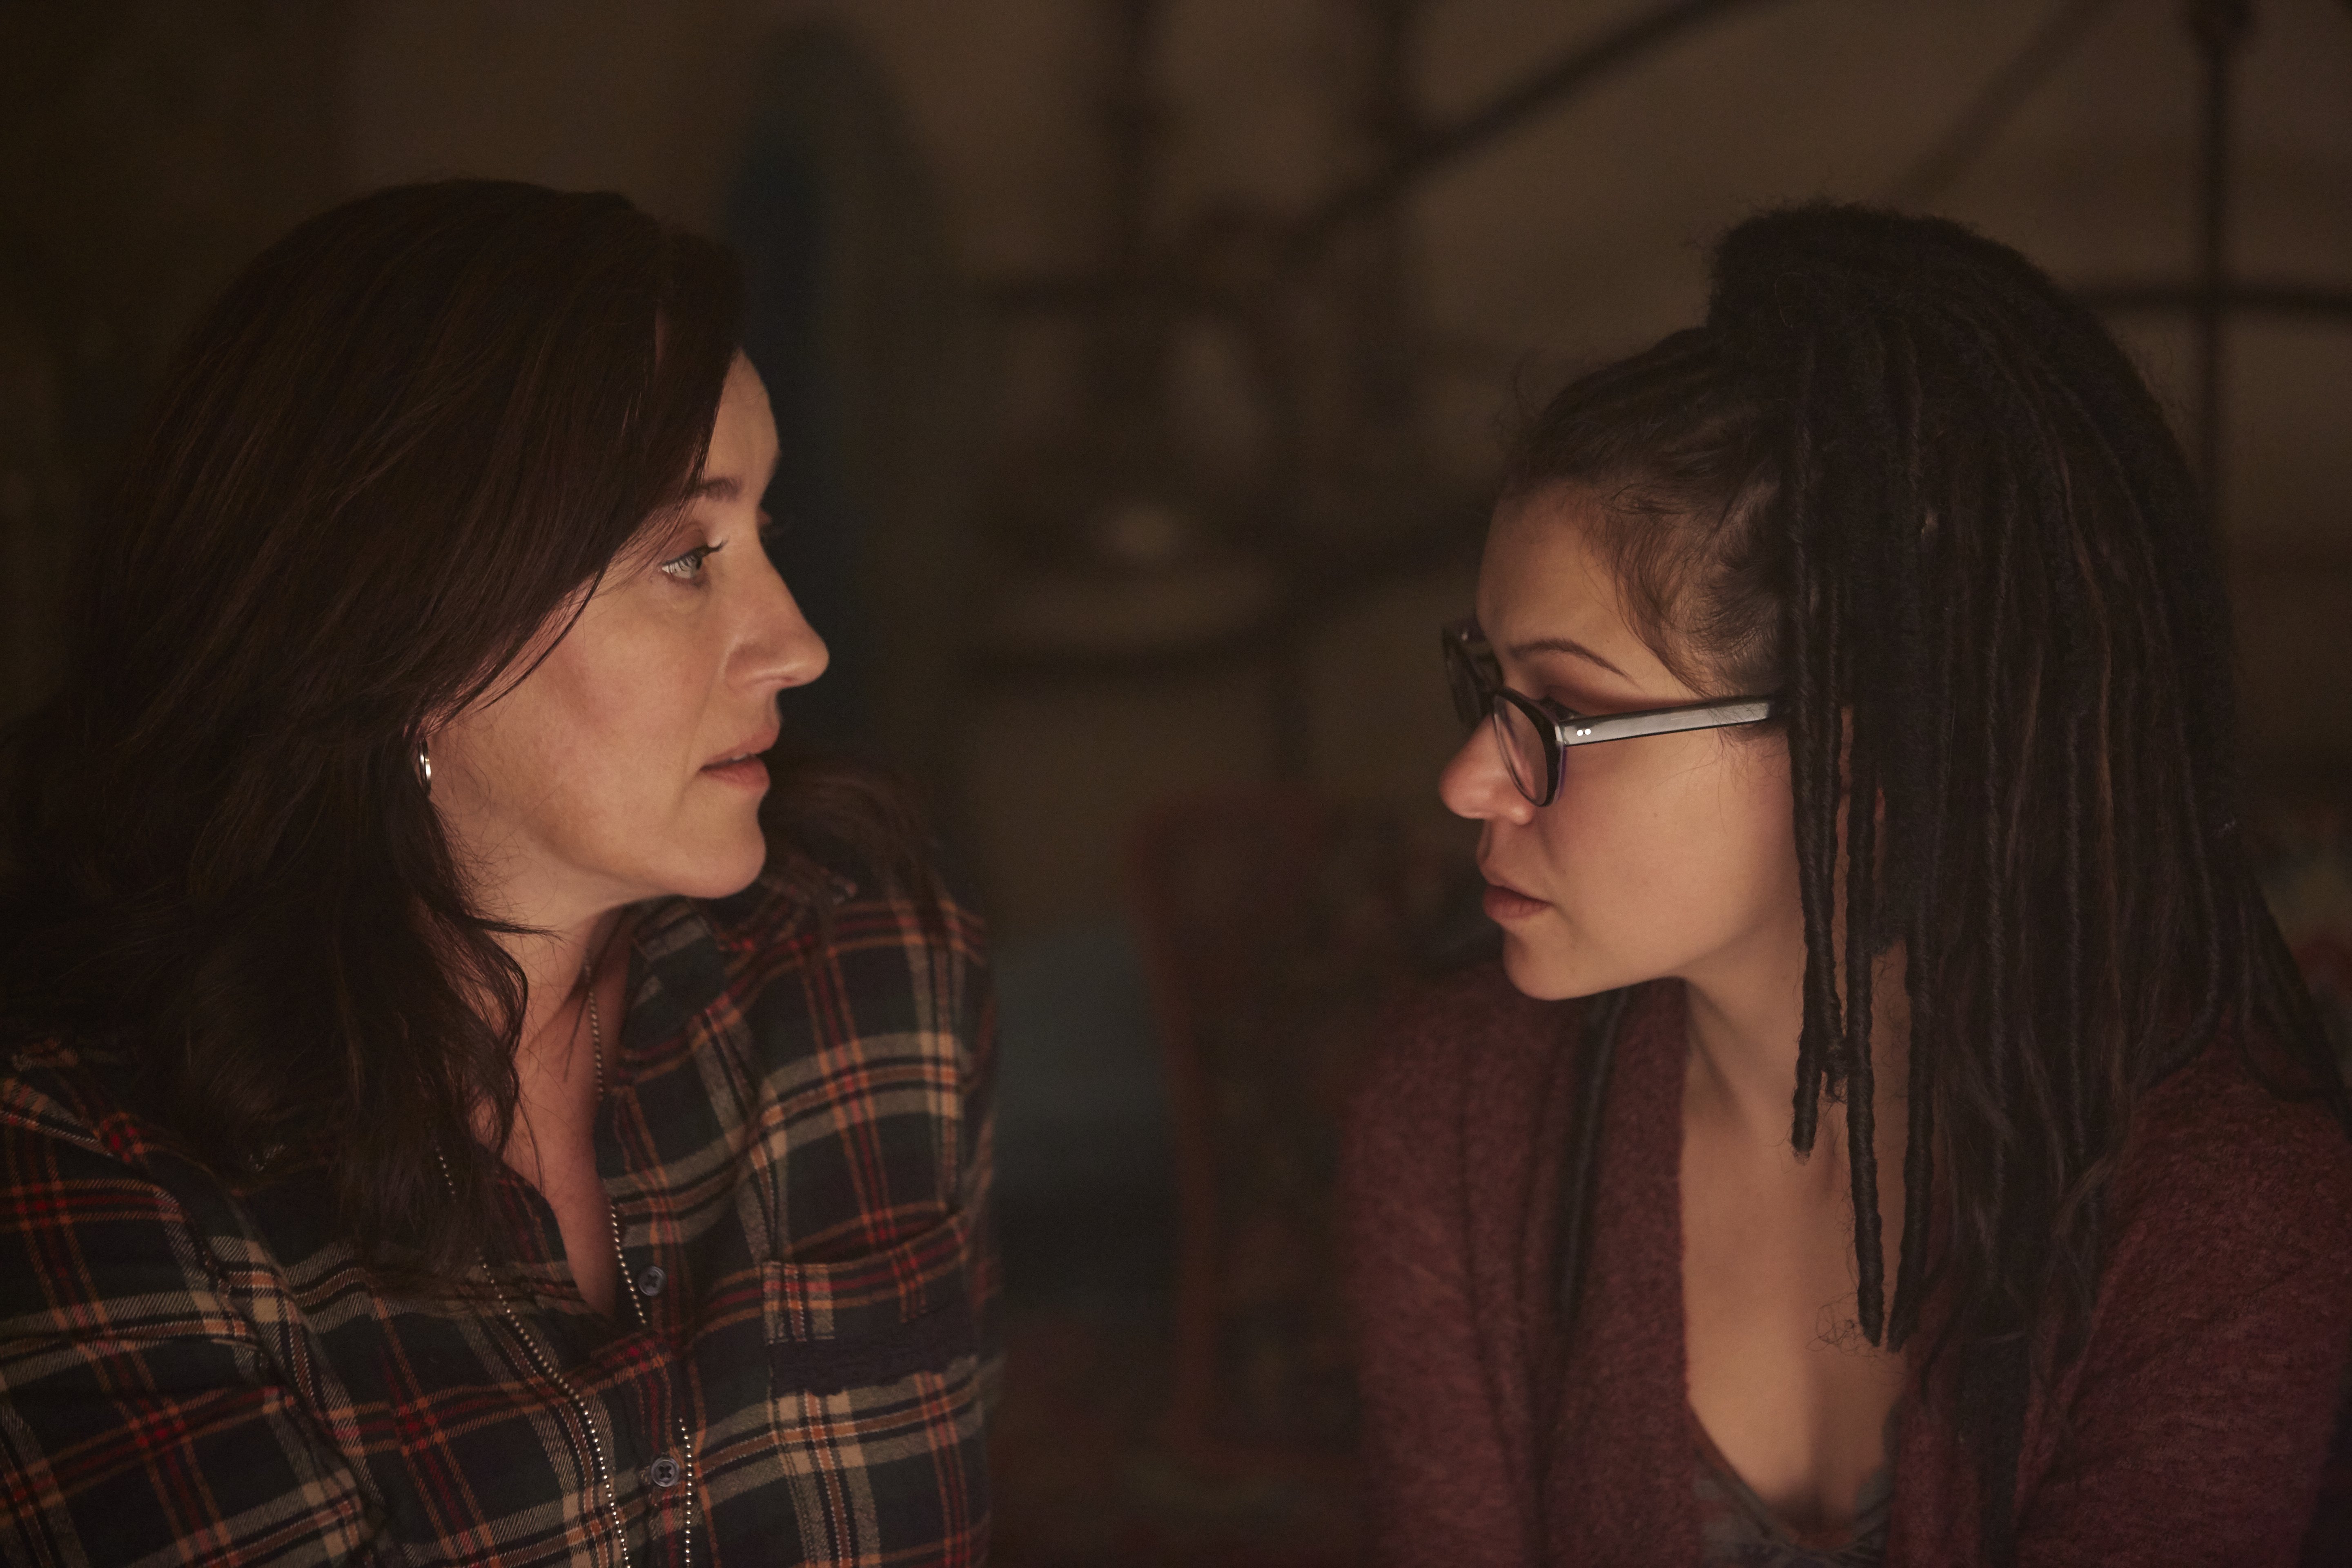 Cosima + Delphine || I will never leave you || Orphan Black - YouTube